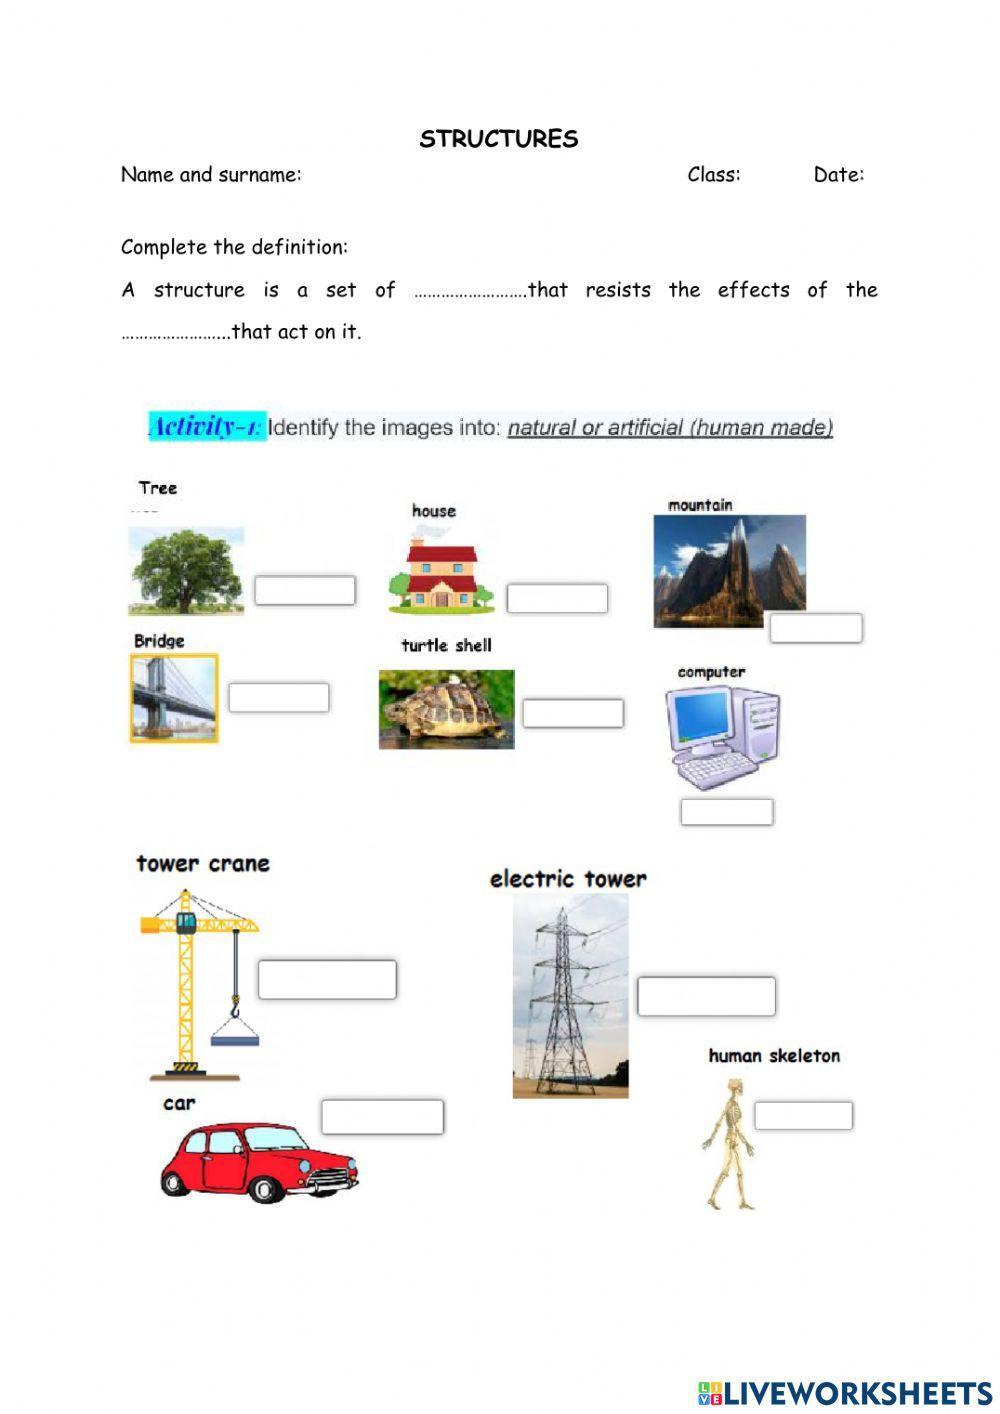 Structures revision